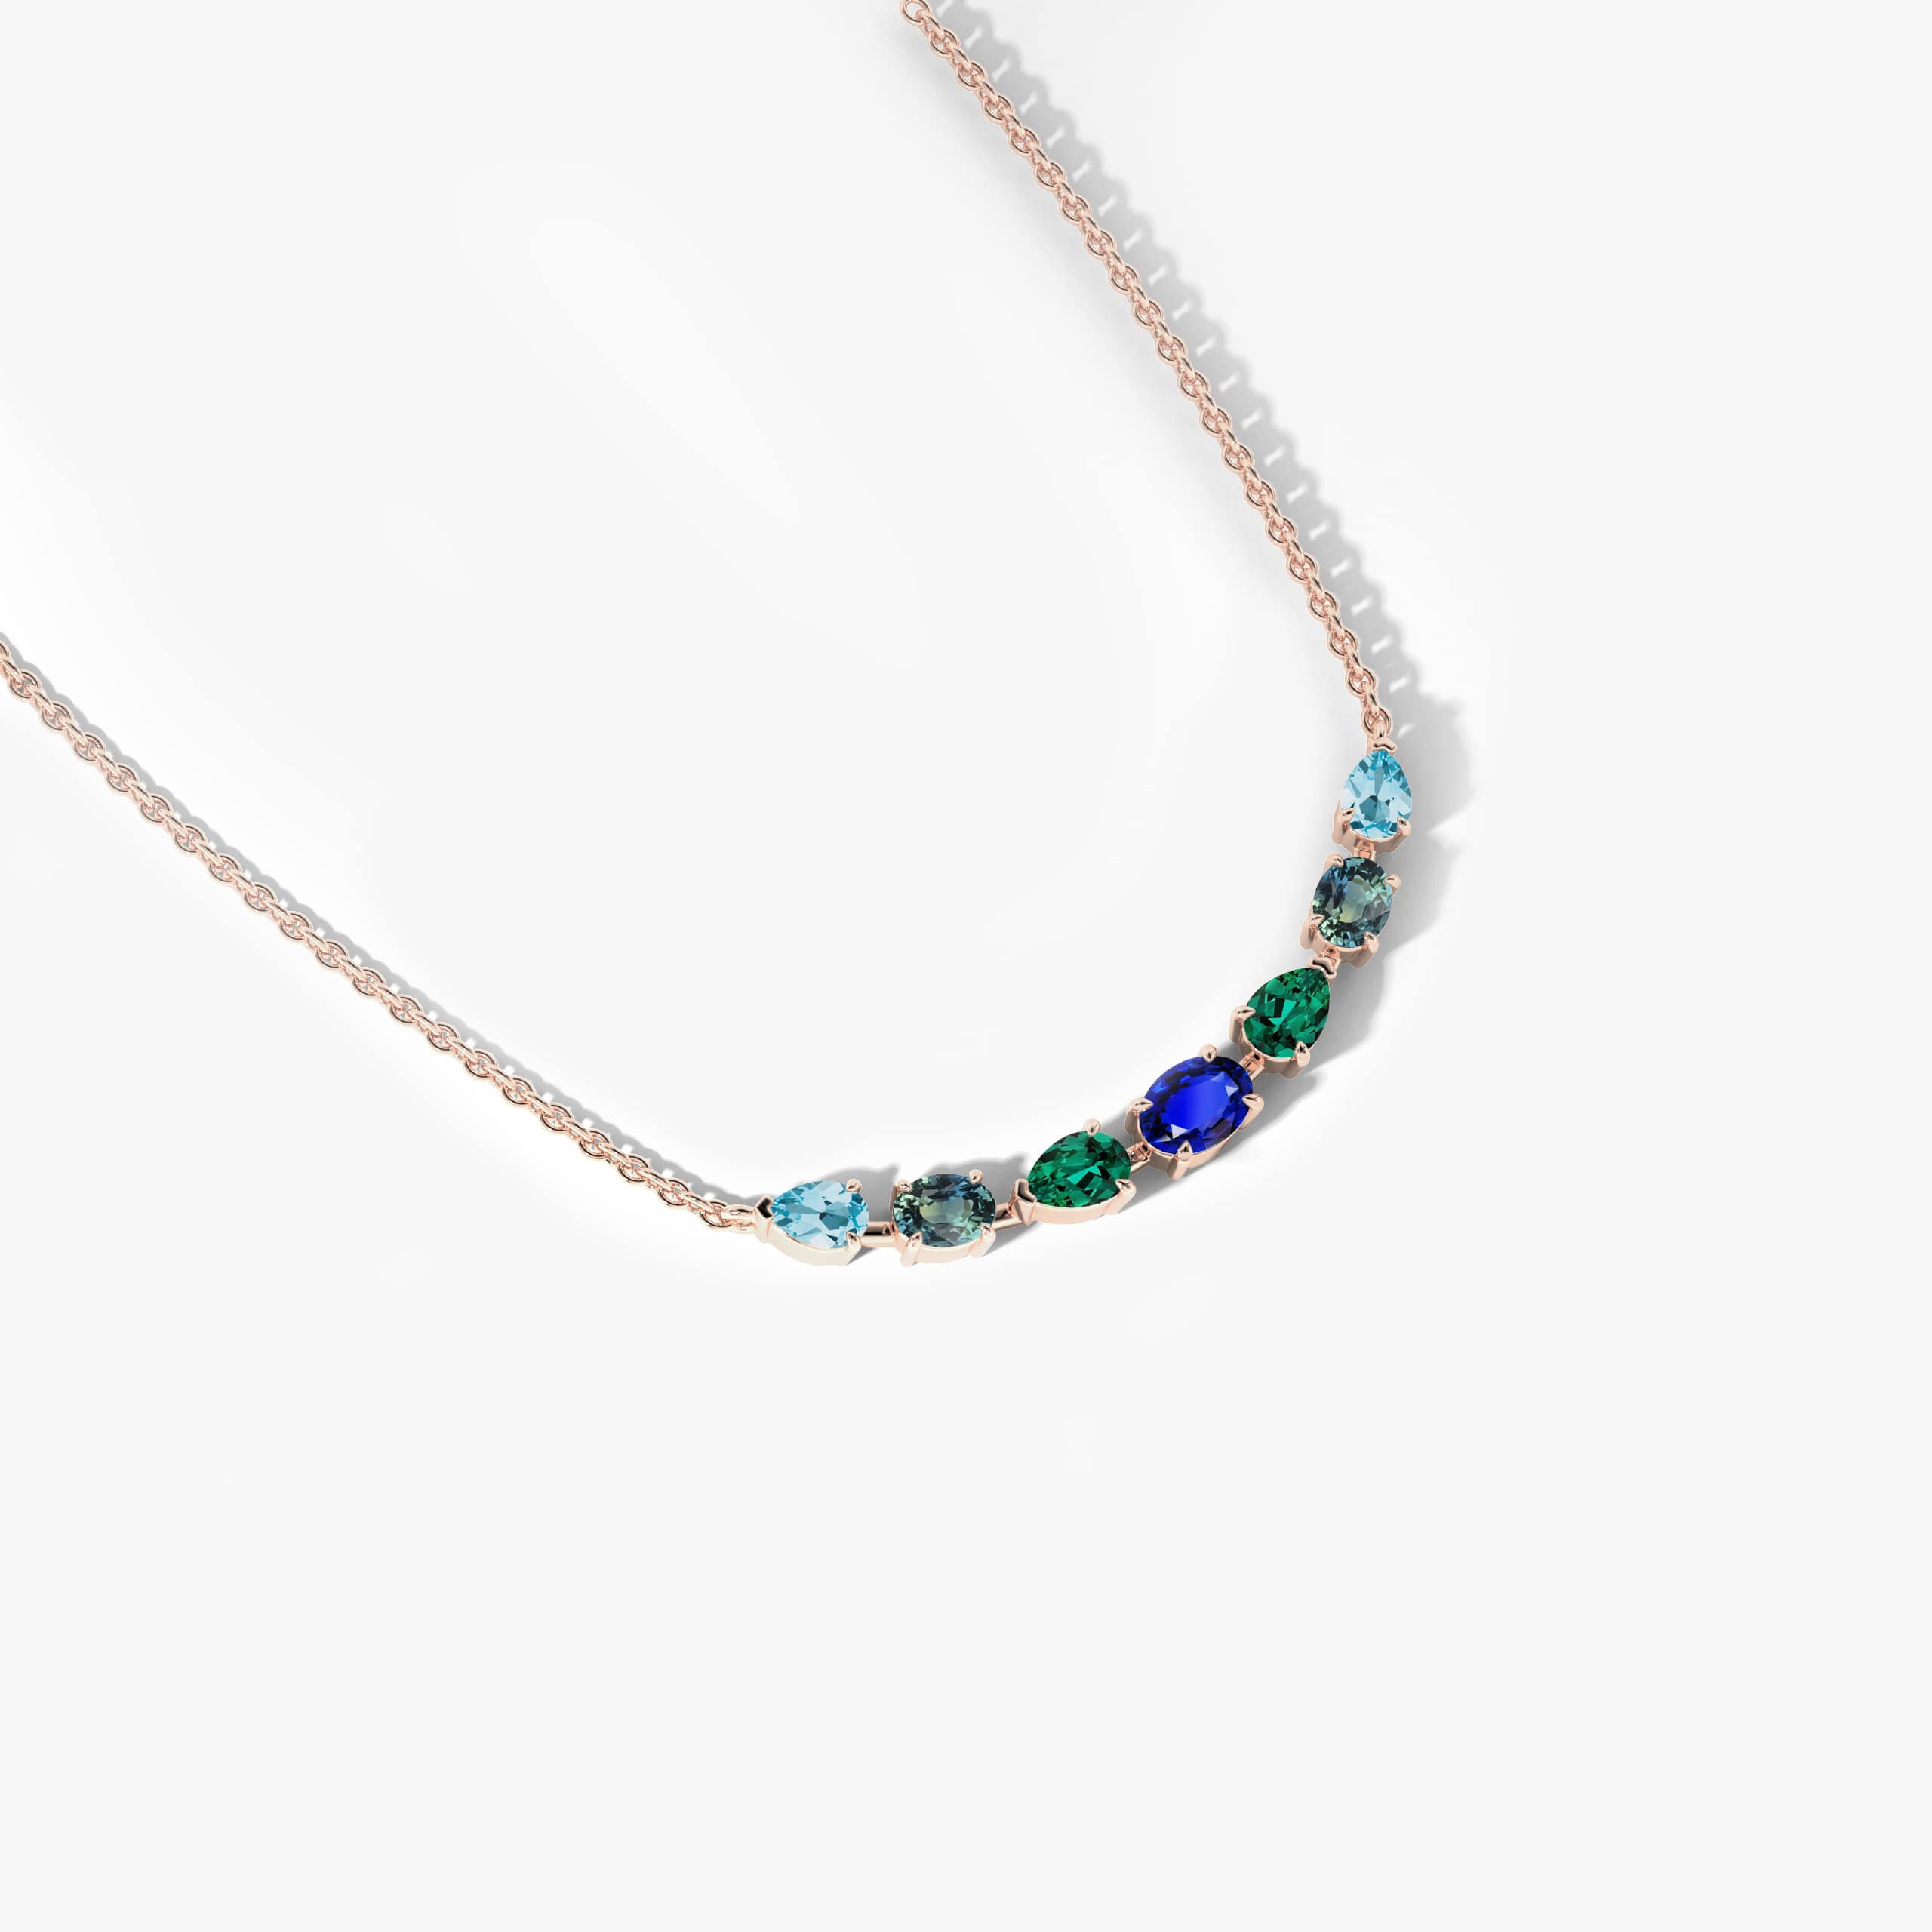 Emerald and Sapphire combination gemstone bar necklace